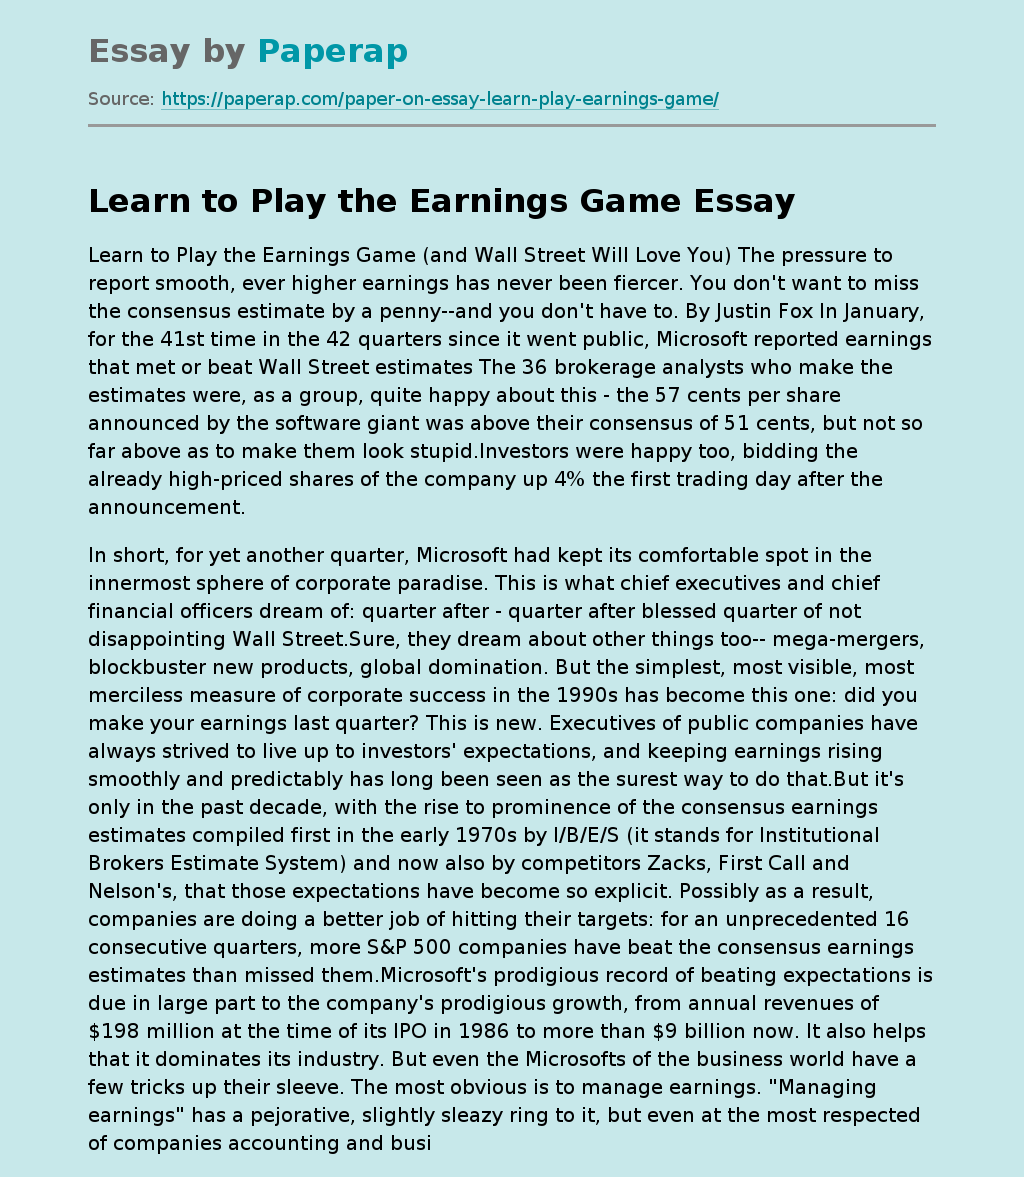 Learn to Play the Earnings Game